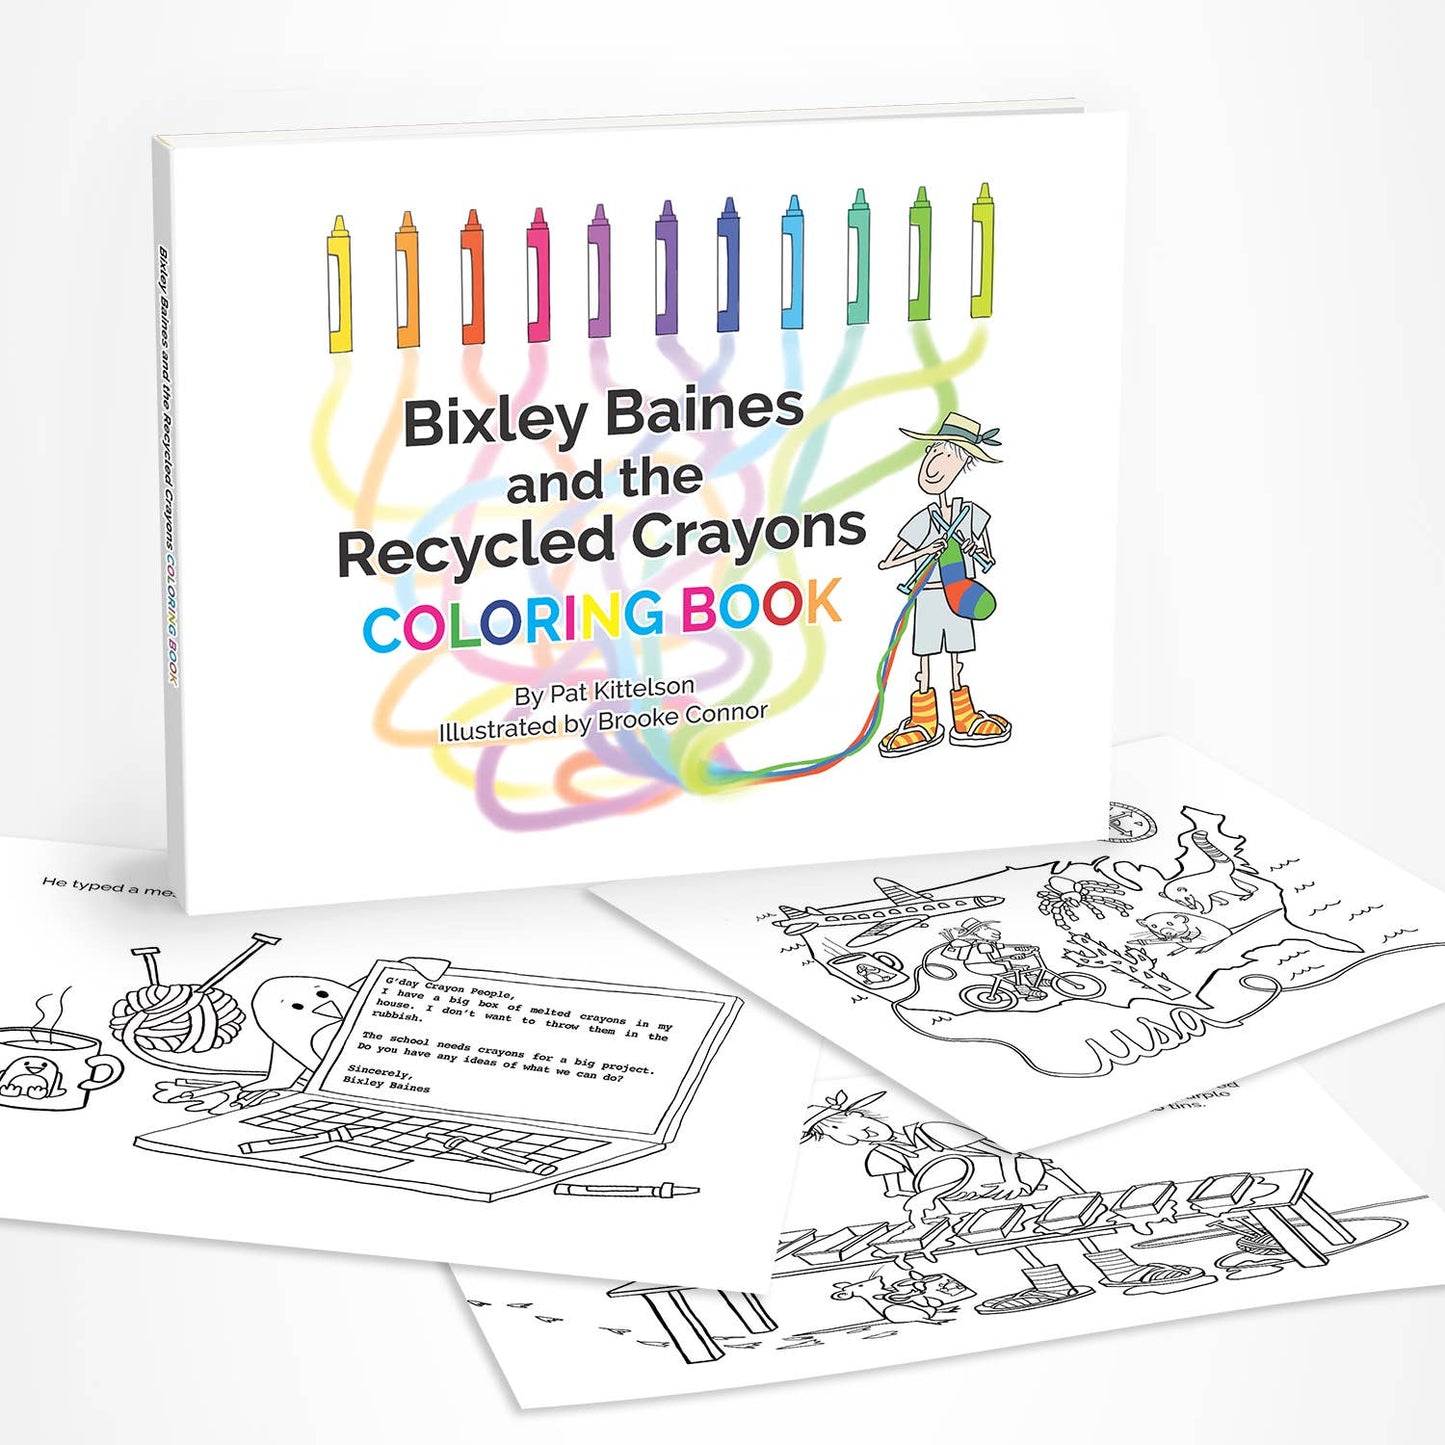 Bixley Baines and the Recycled Crayons Coloring Book